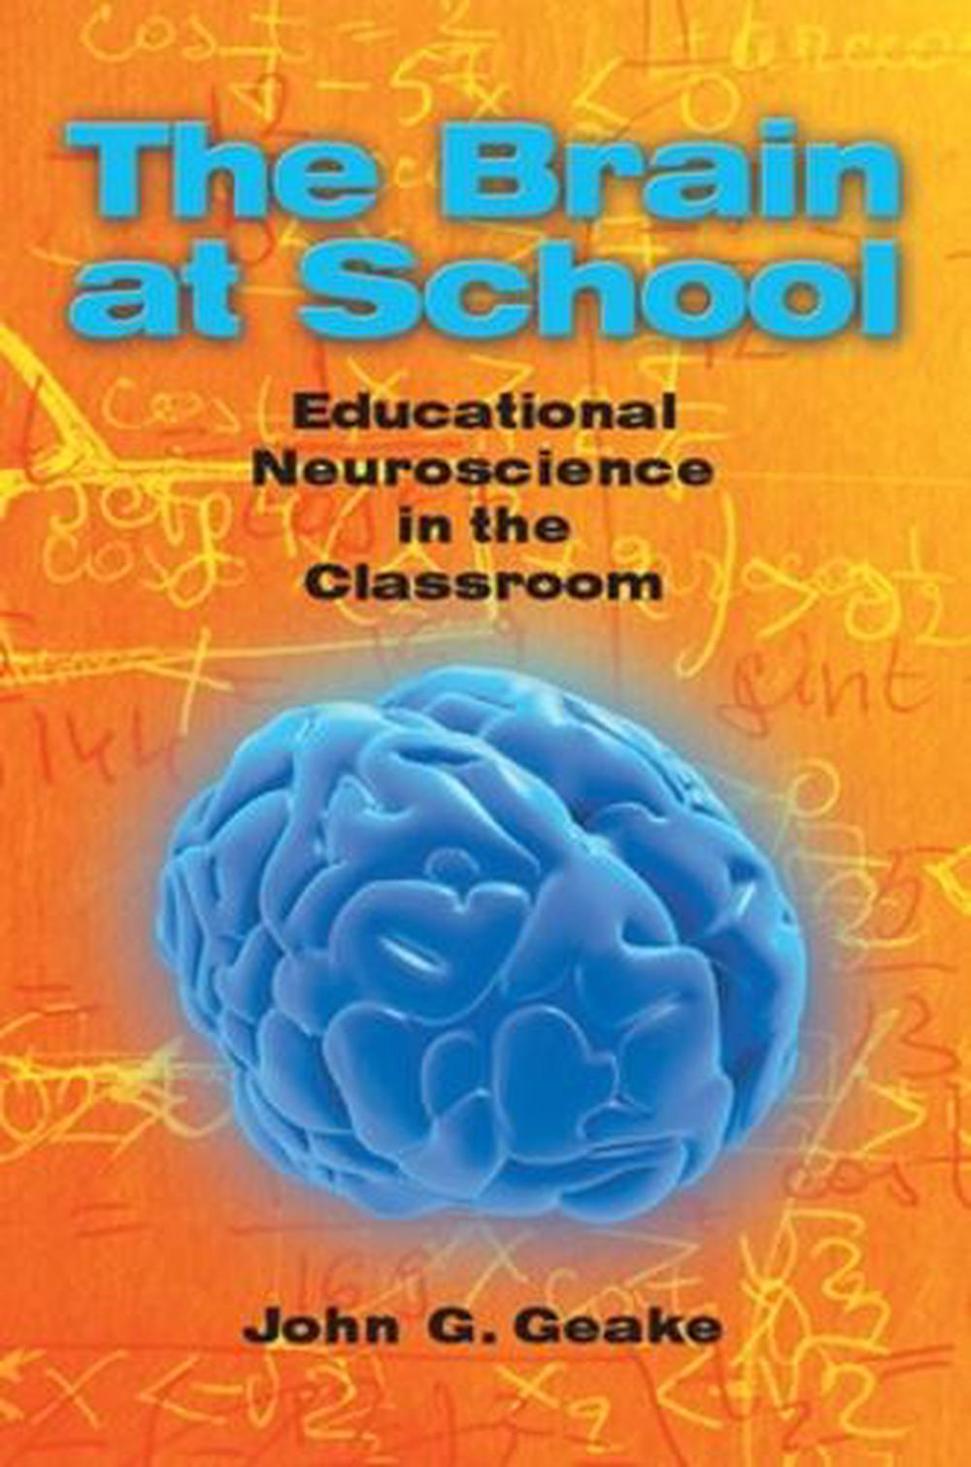 How Can We Use Neuroscience To Help Students Learn More Effectively?